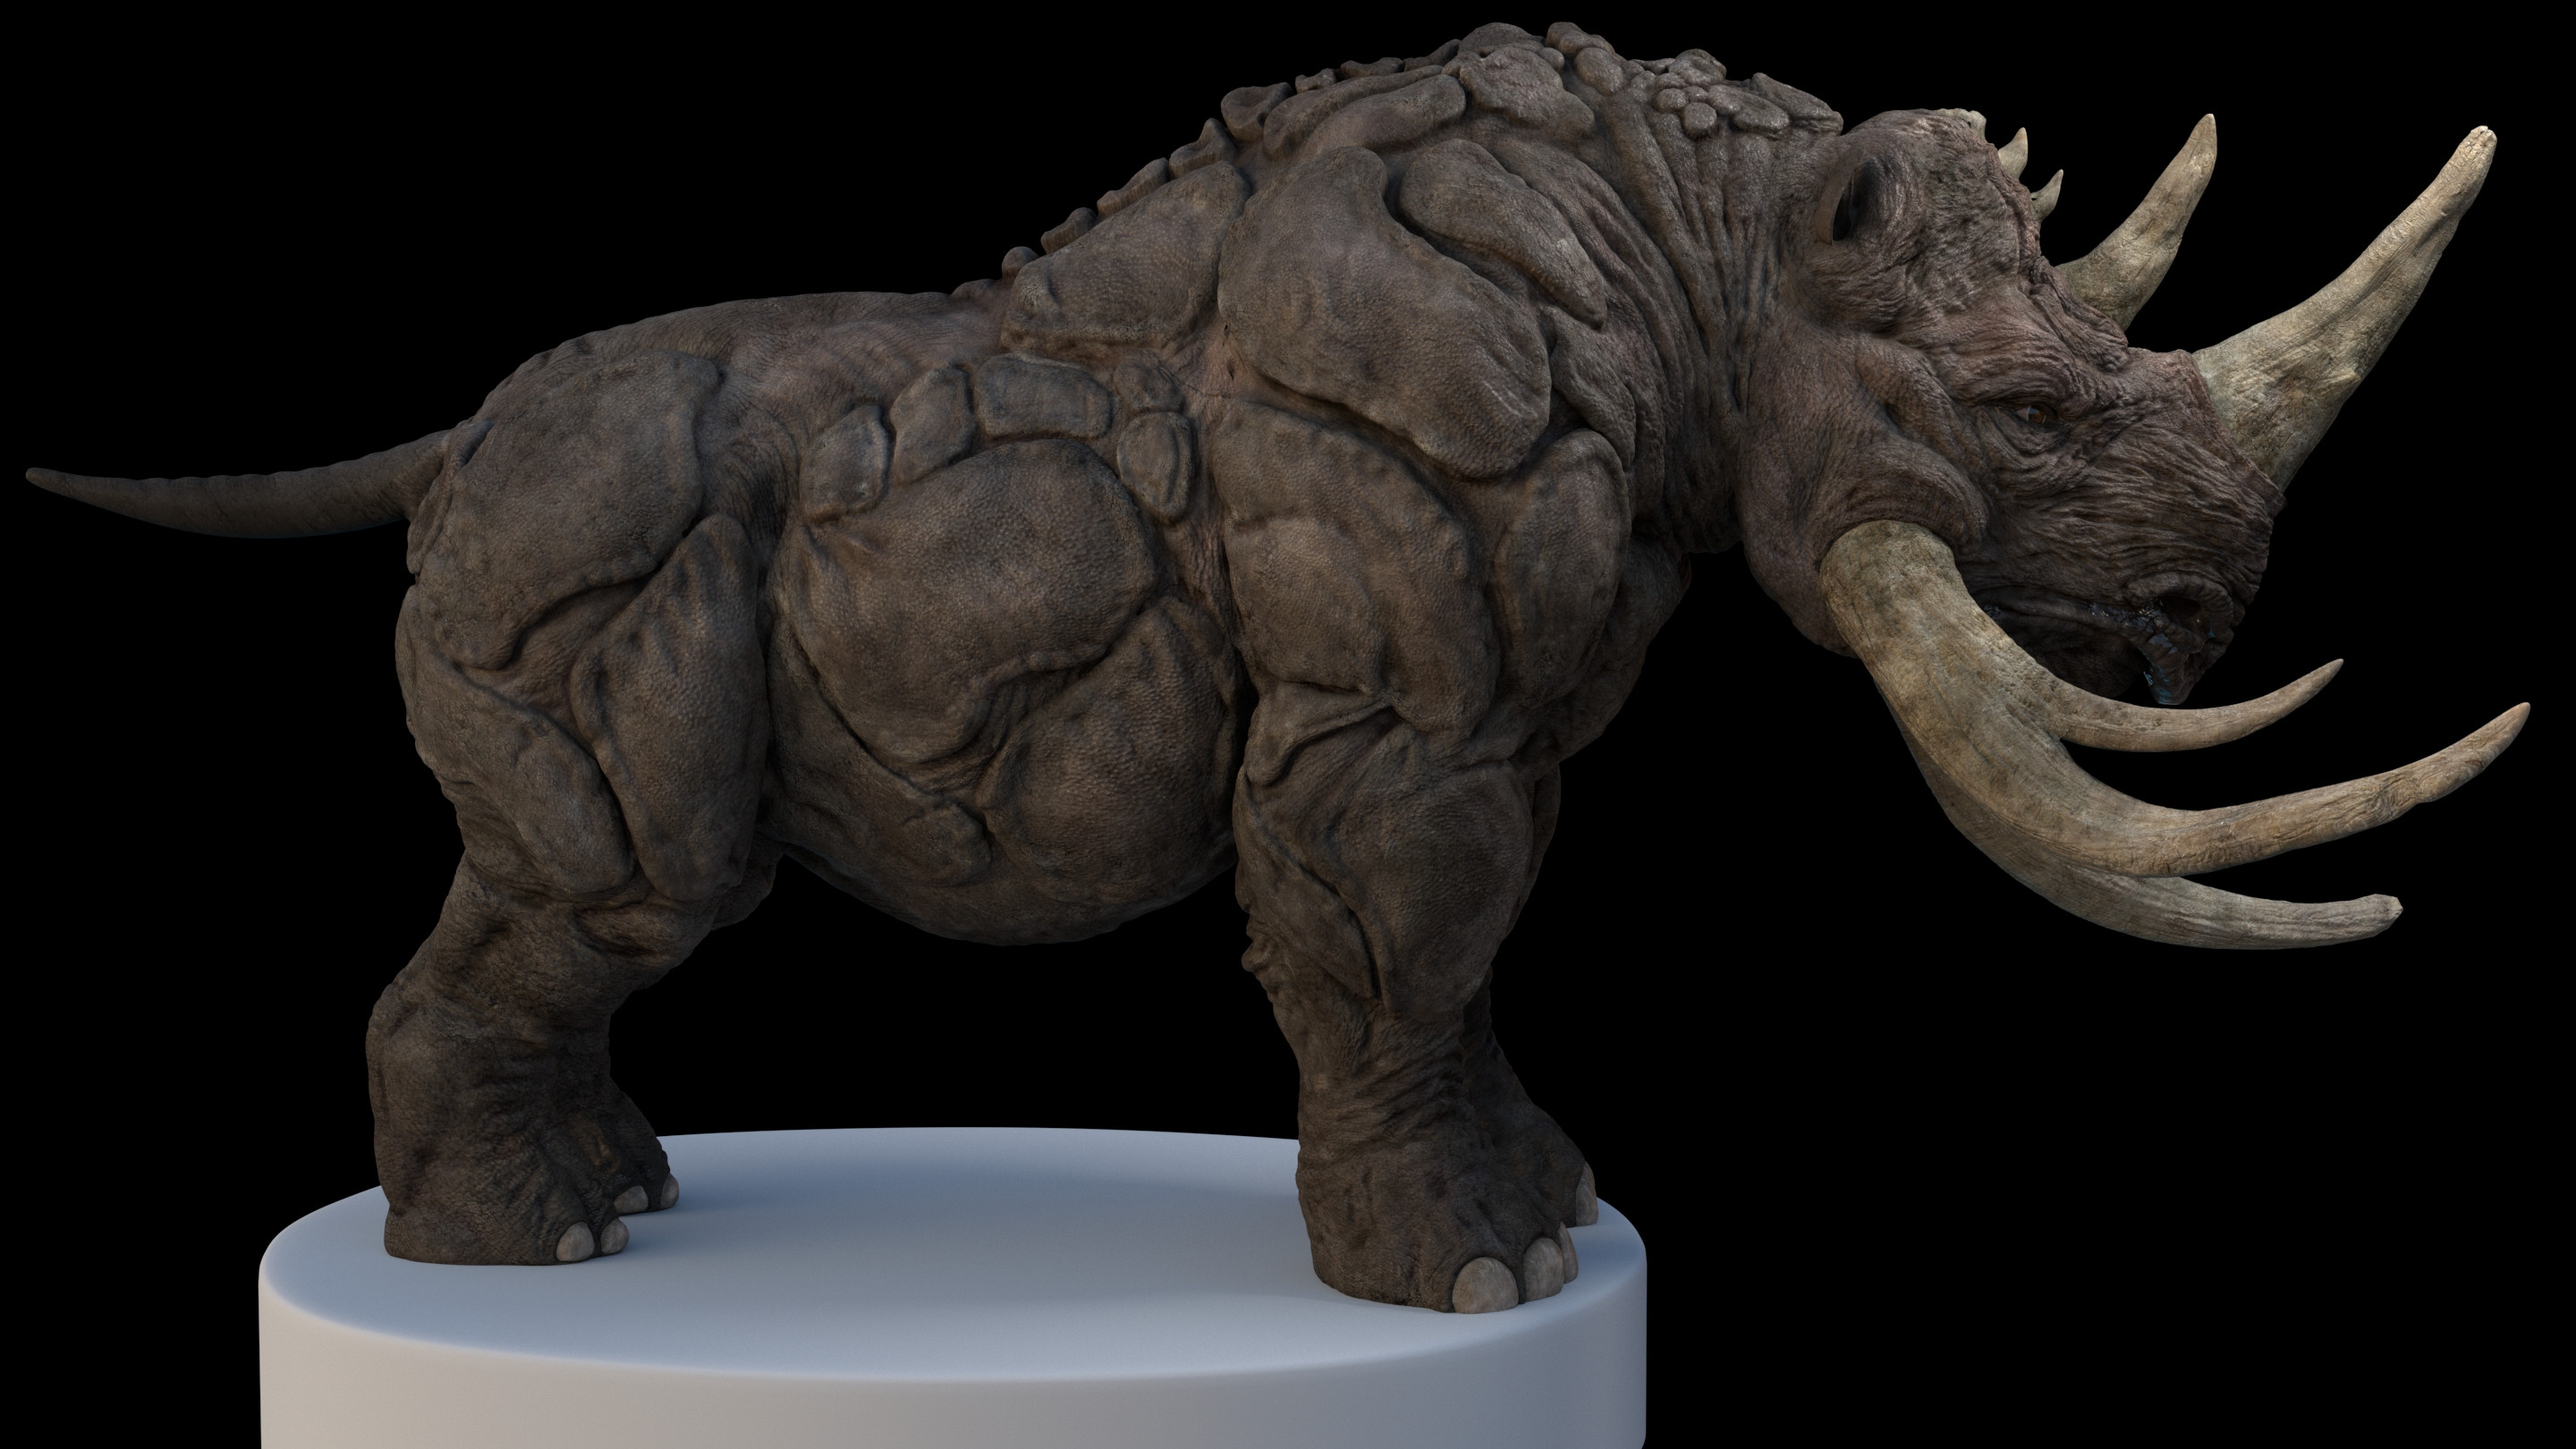 An old first pass WIP render of the Rhino in Vray after getting the production model locked in.